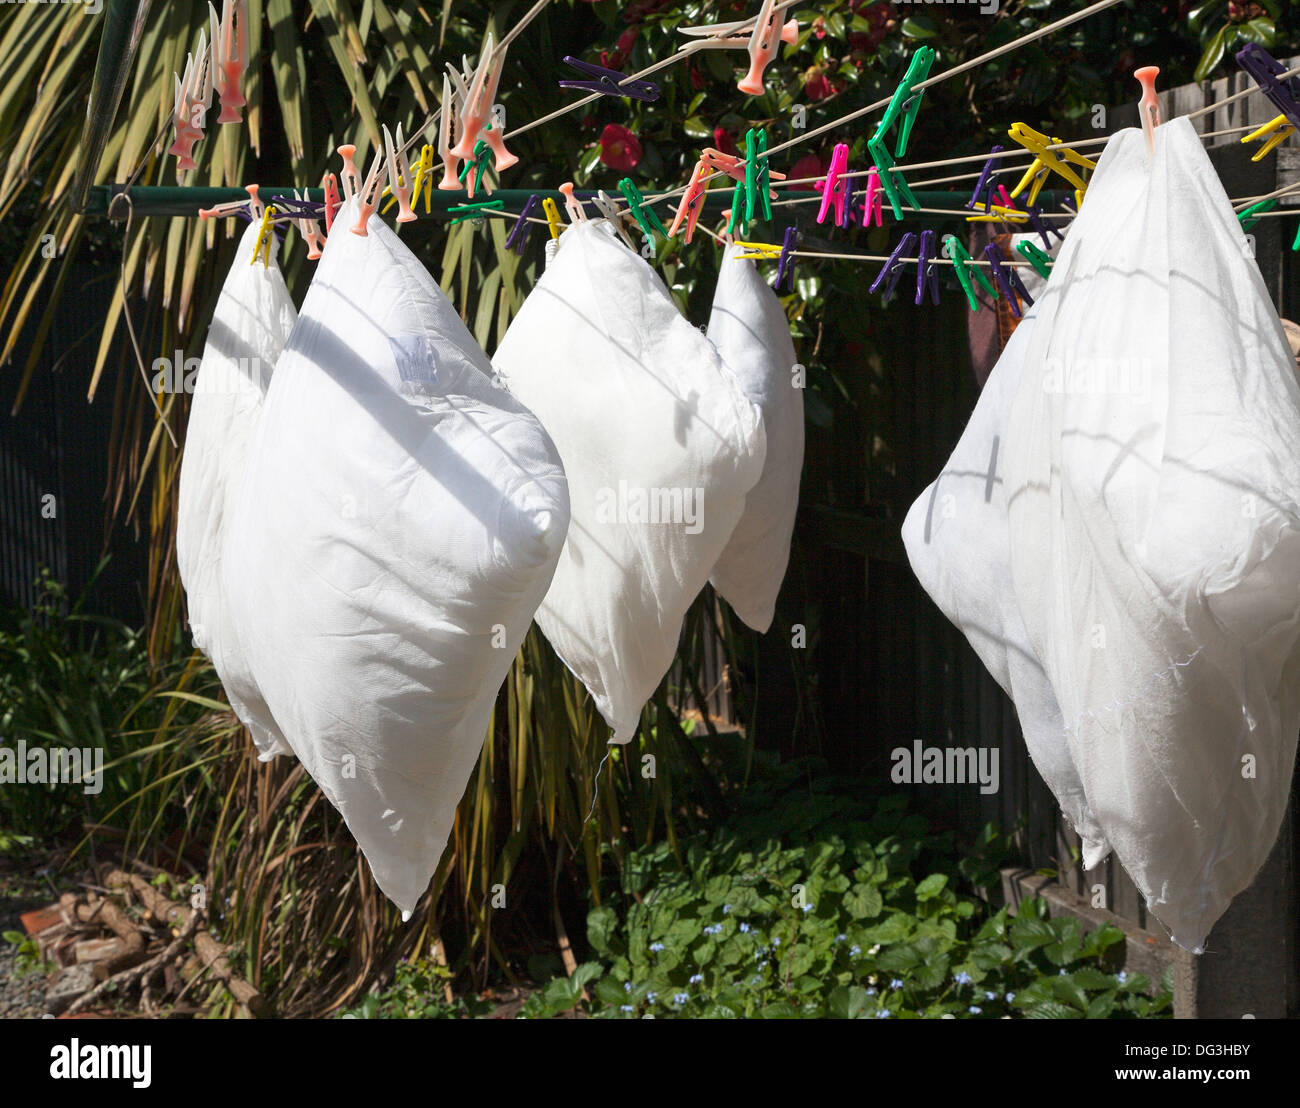 Washed cushions and cushion covers drying hanging on a washing line in the sunshine. Stock Photo